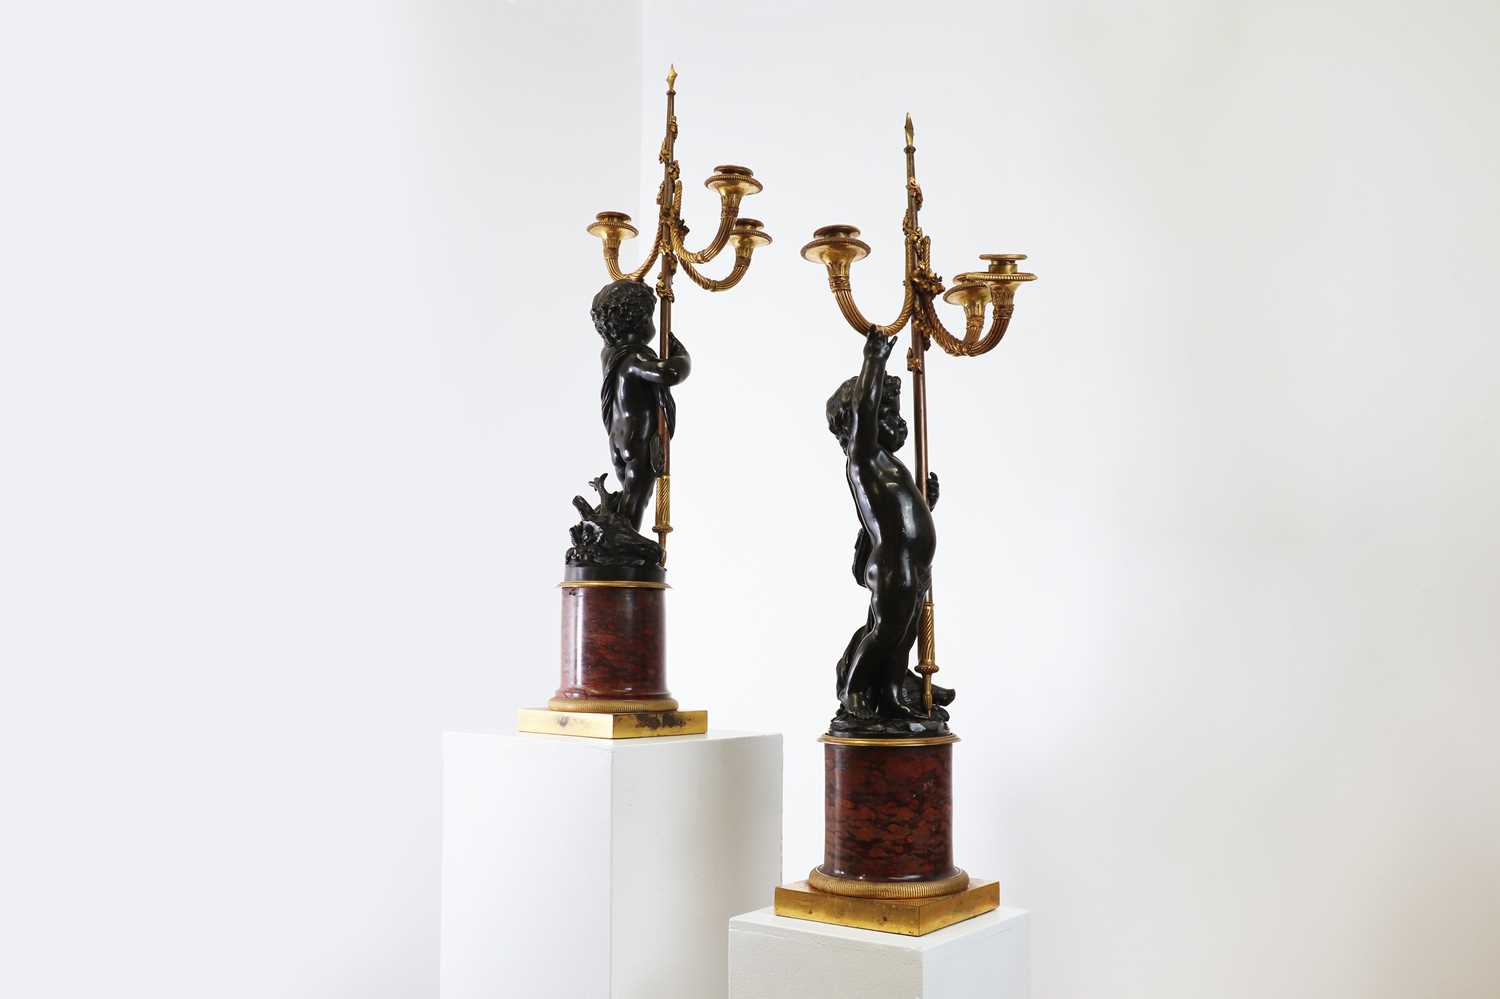 A pair of French Empire bronze and marble candelabra attributed to François Rémond (c.1747-1812), - Image 4 of 23